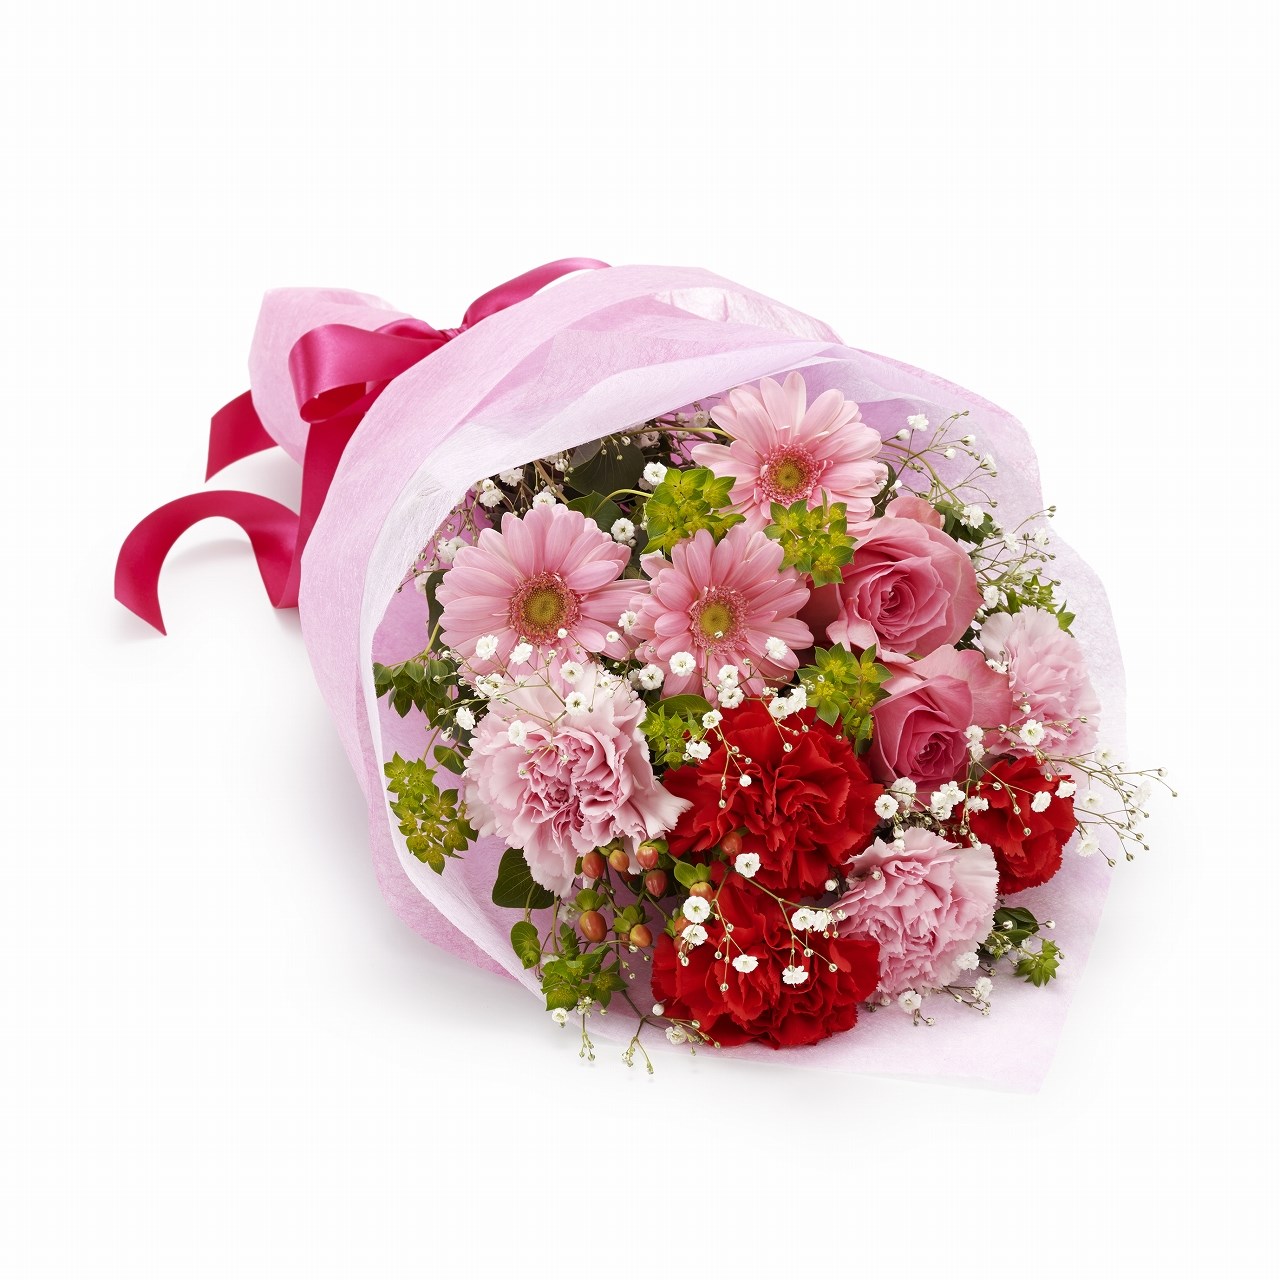 product image for Mothers Day popular hand-tied